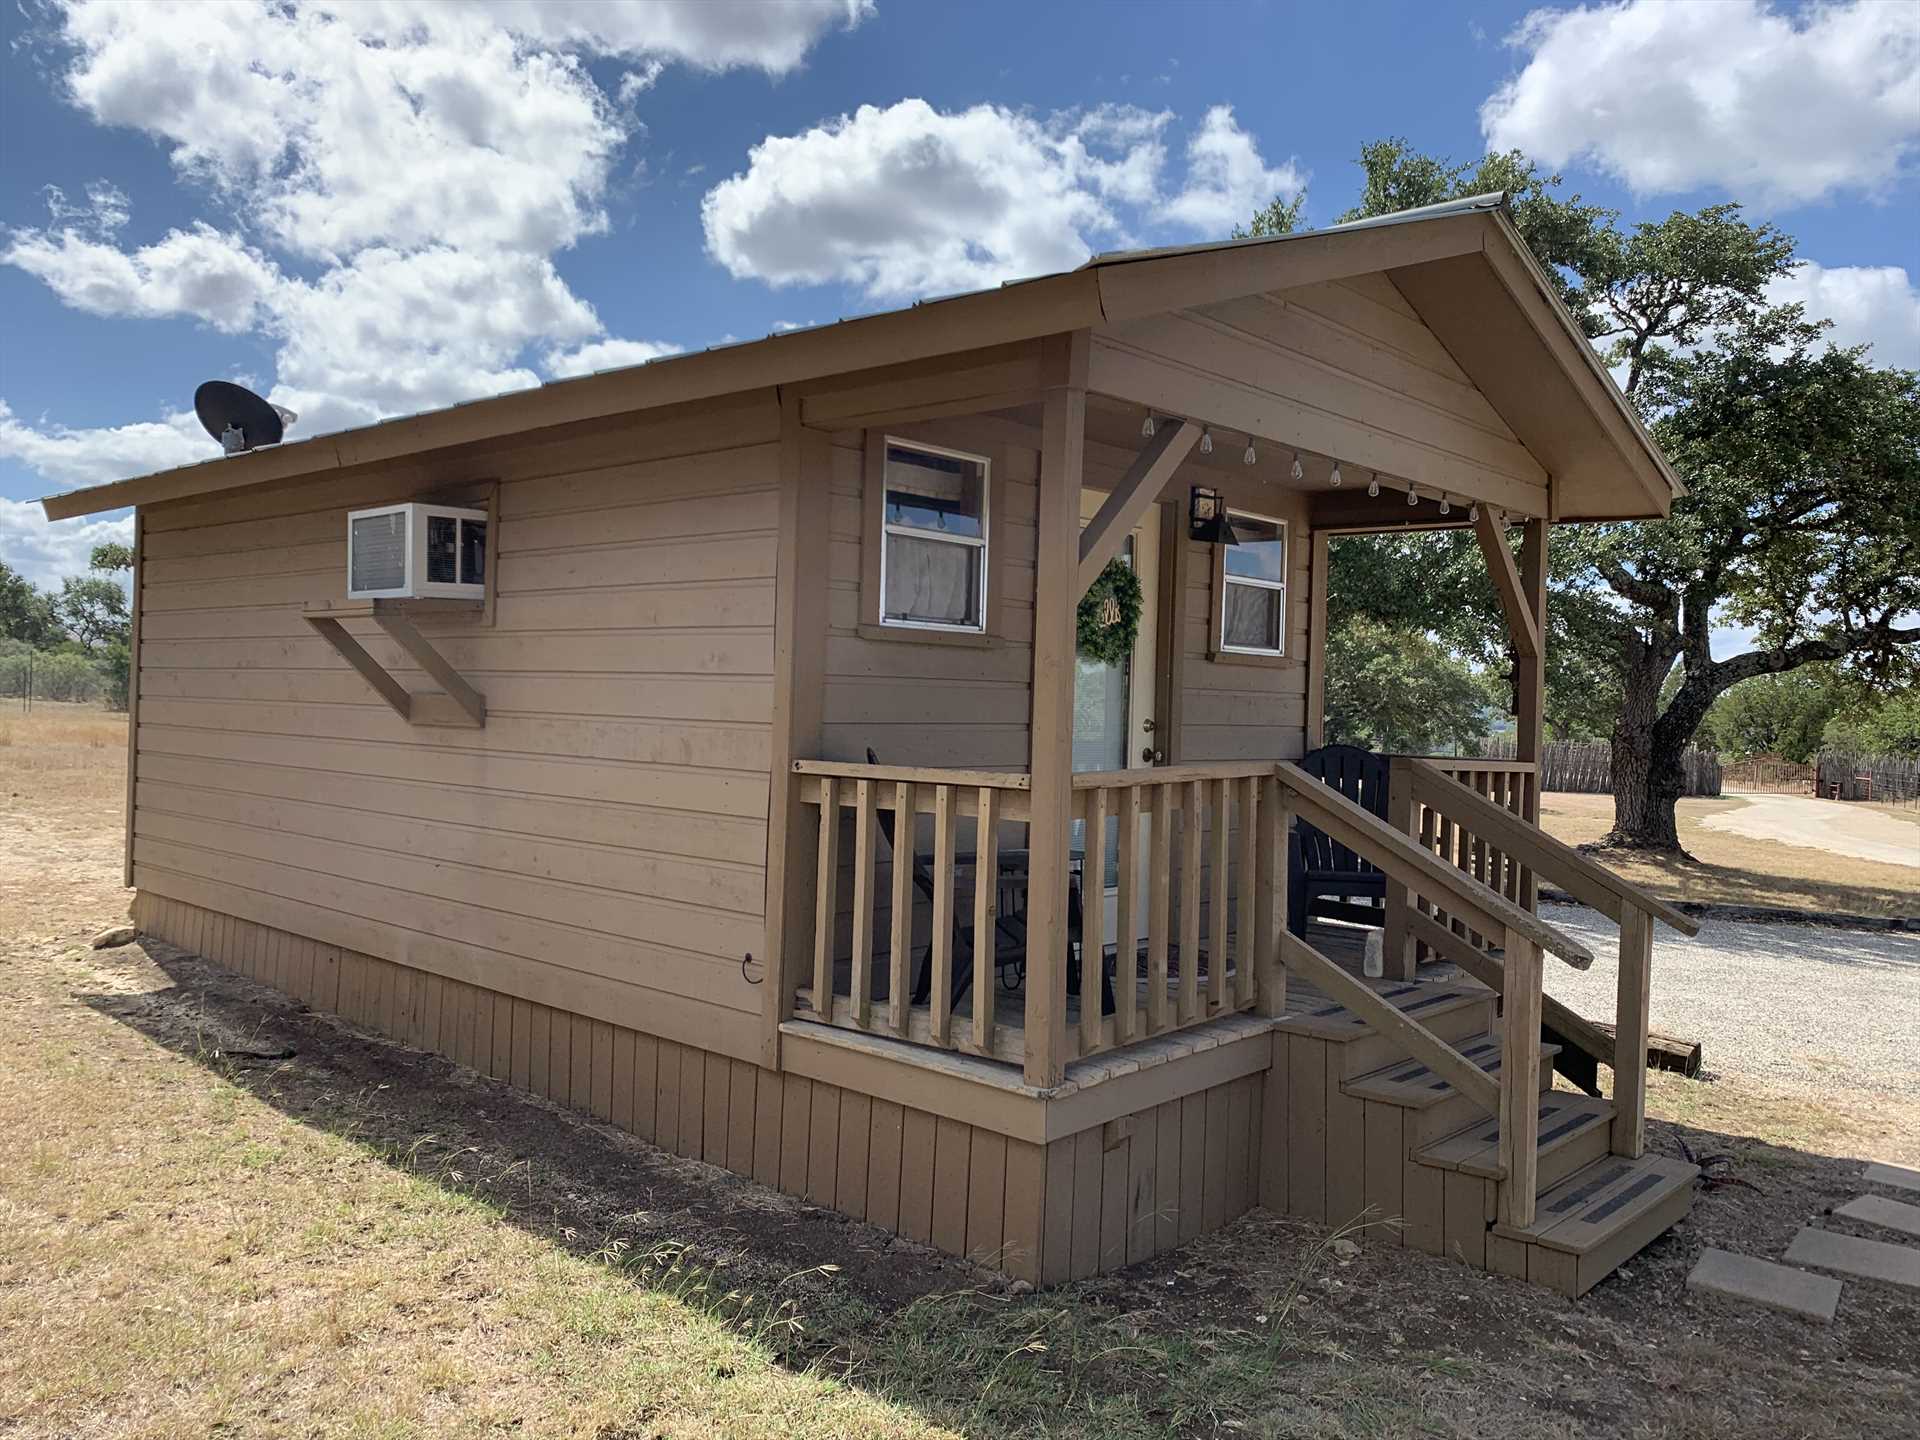                                                 Welcome to the Cowboy Cabin, your cozy, climate-controlled romantic nest in the heart of the Hill Country!